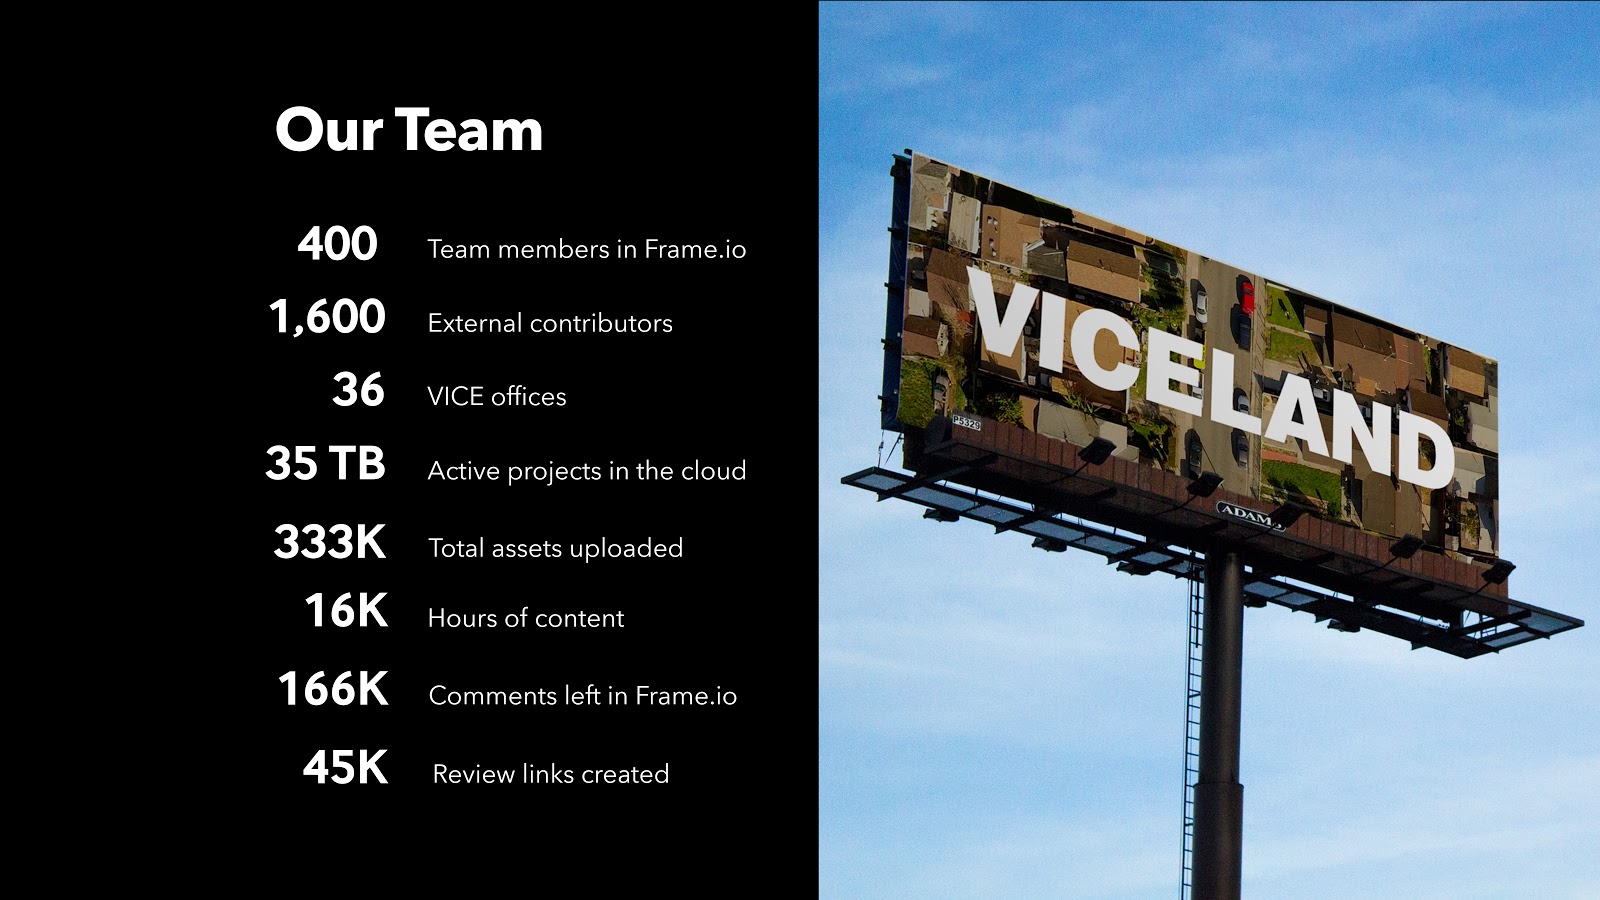 Vice workflow by the numbers